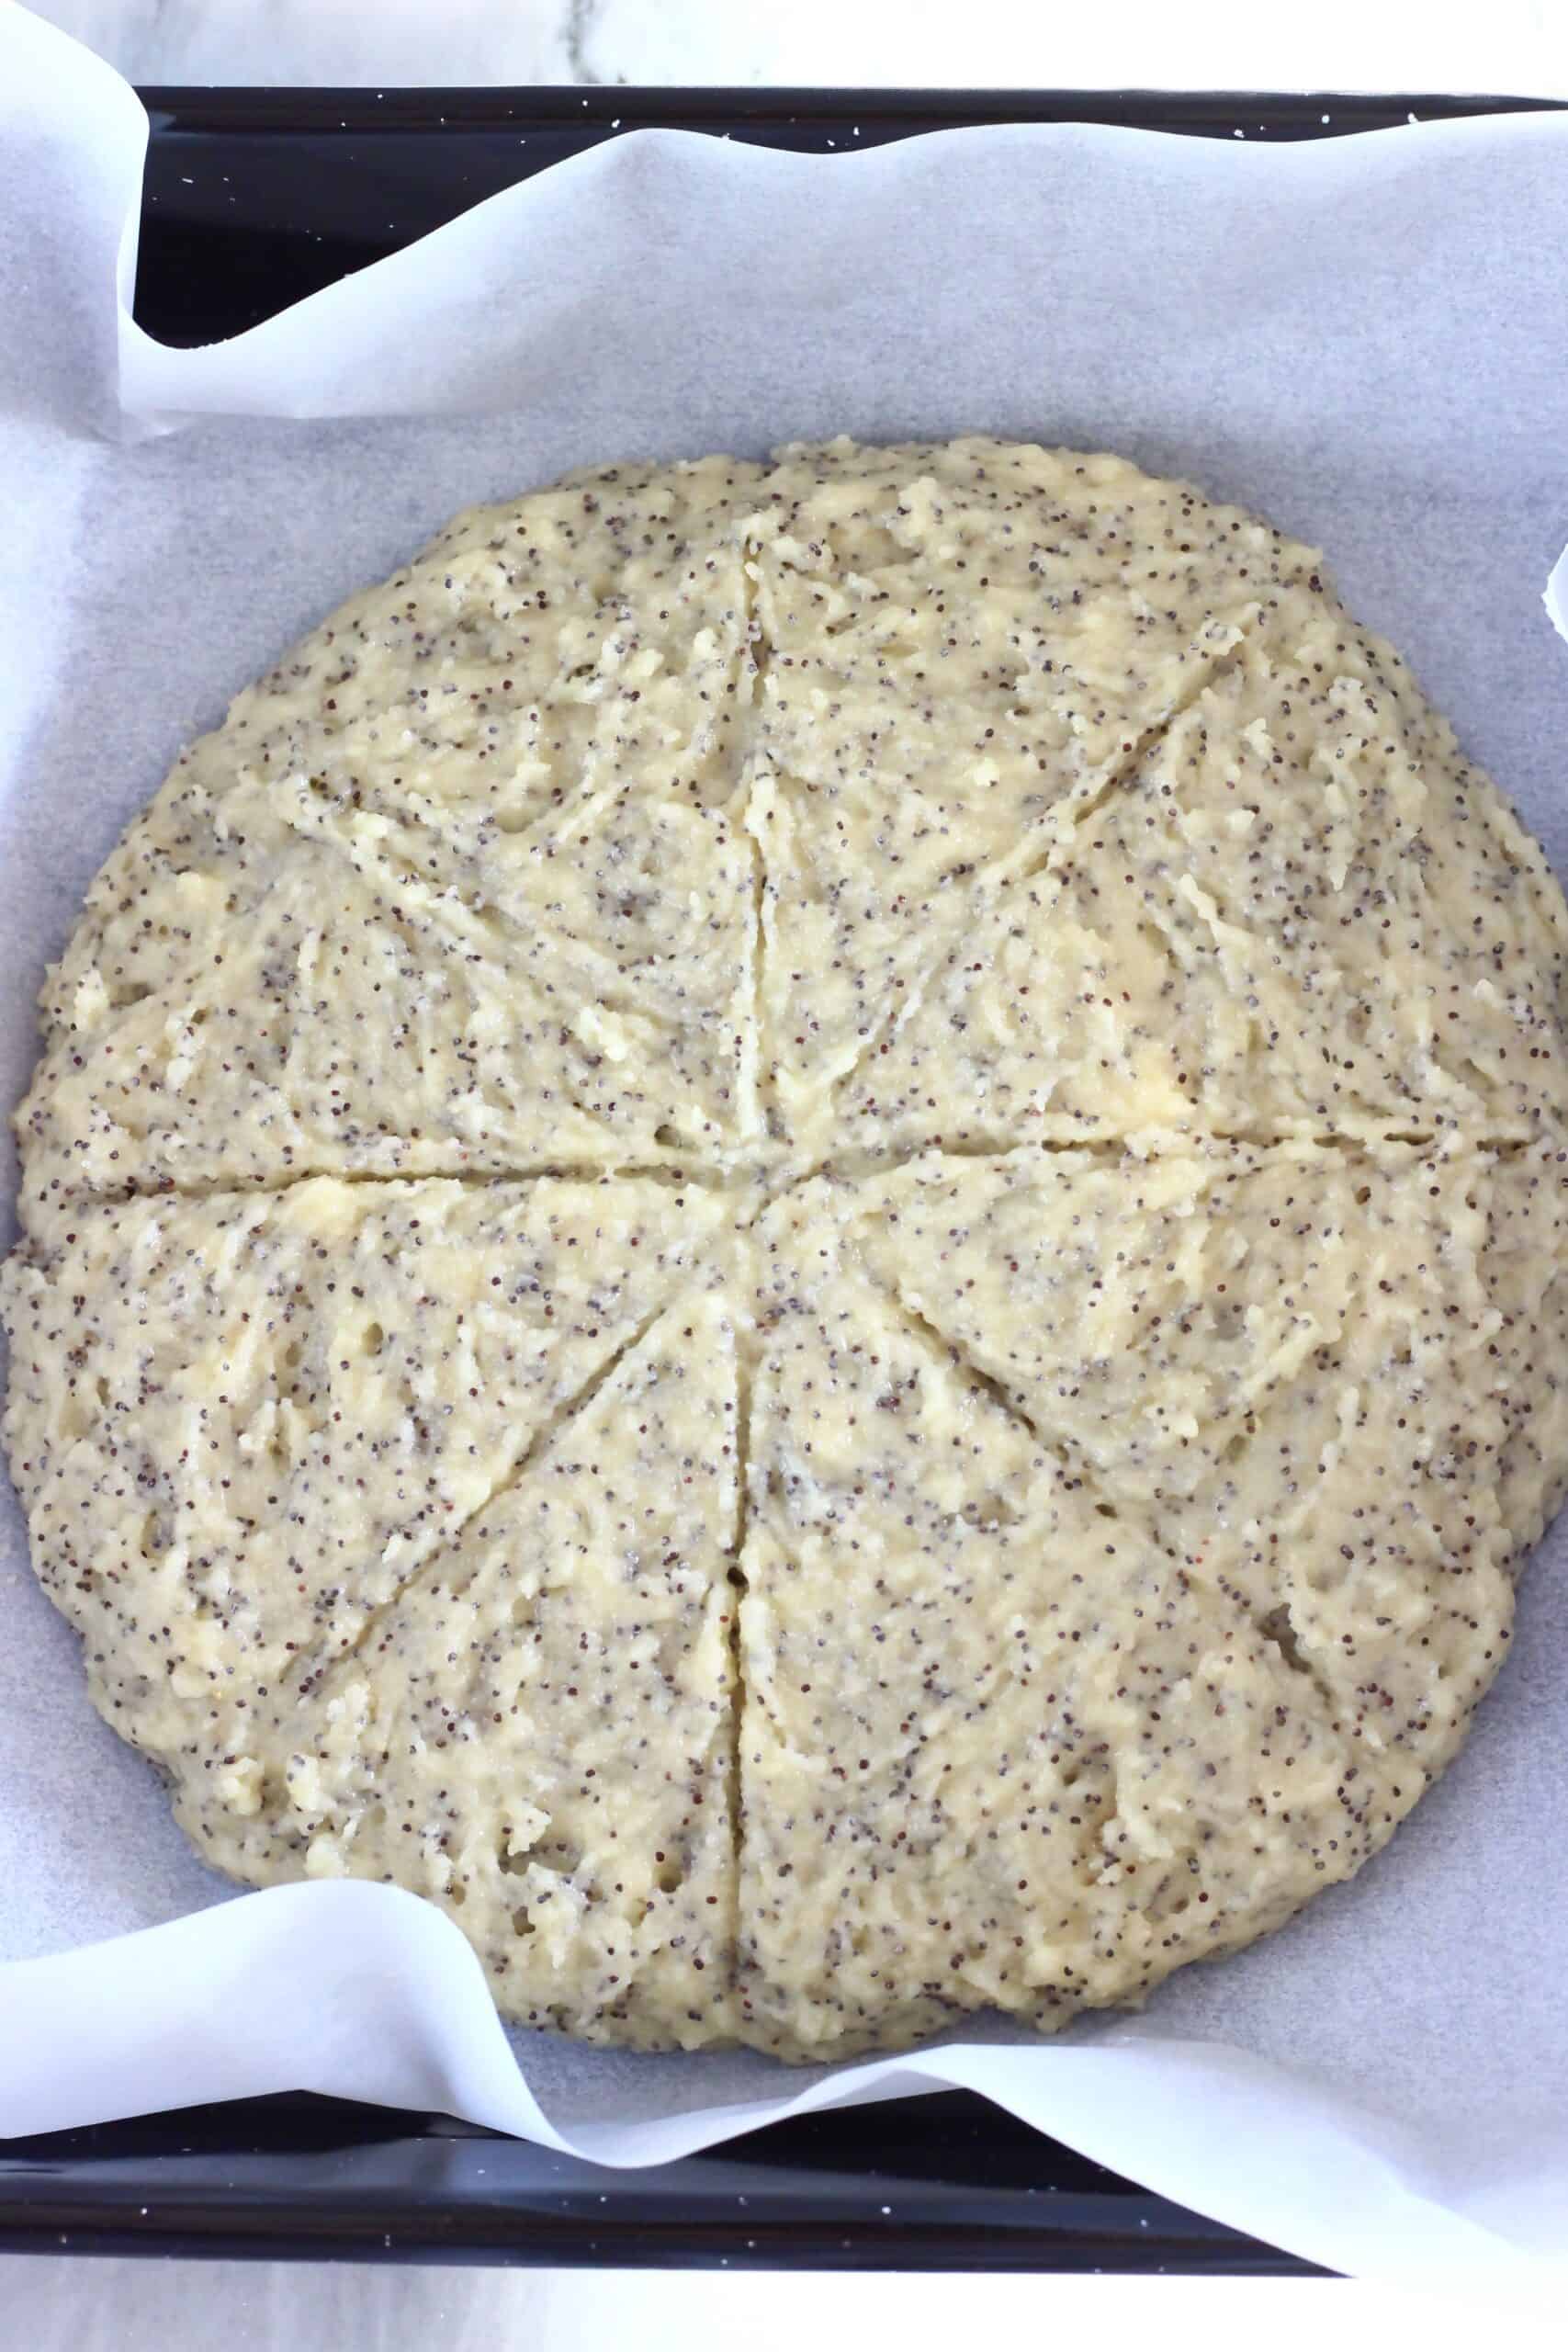 A circle of raw gluten-free vegan lemon poppy seed scones dough scored into eight pieces, on a baking tray lined with baking paper